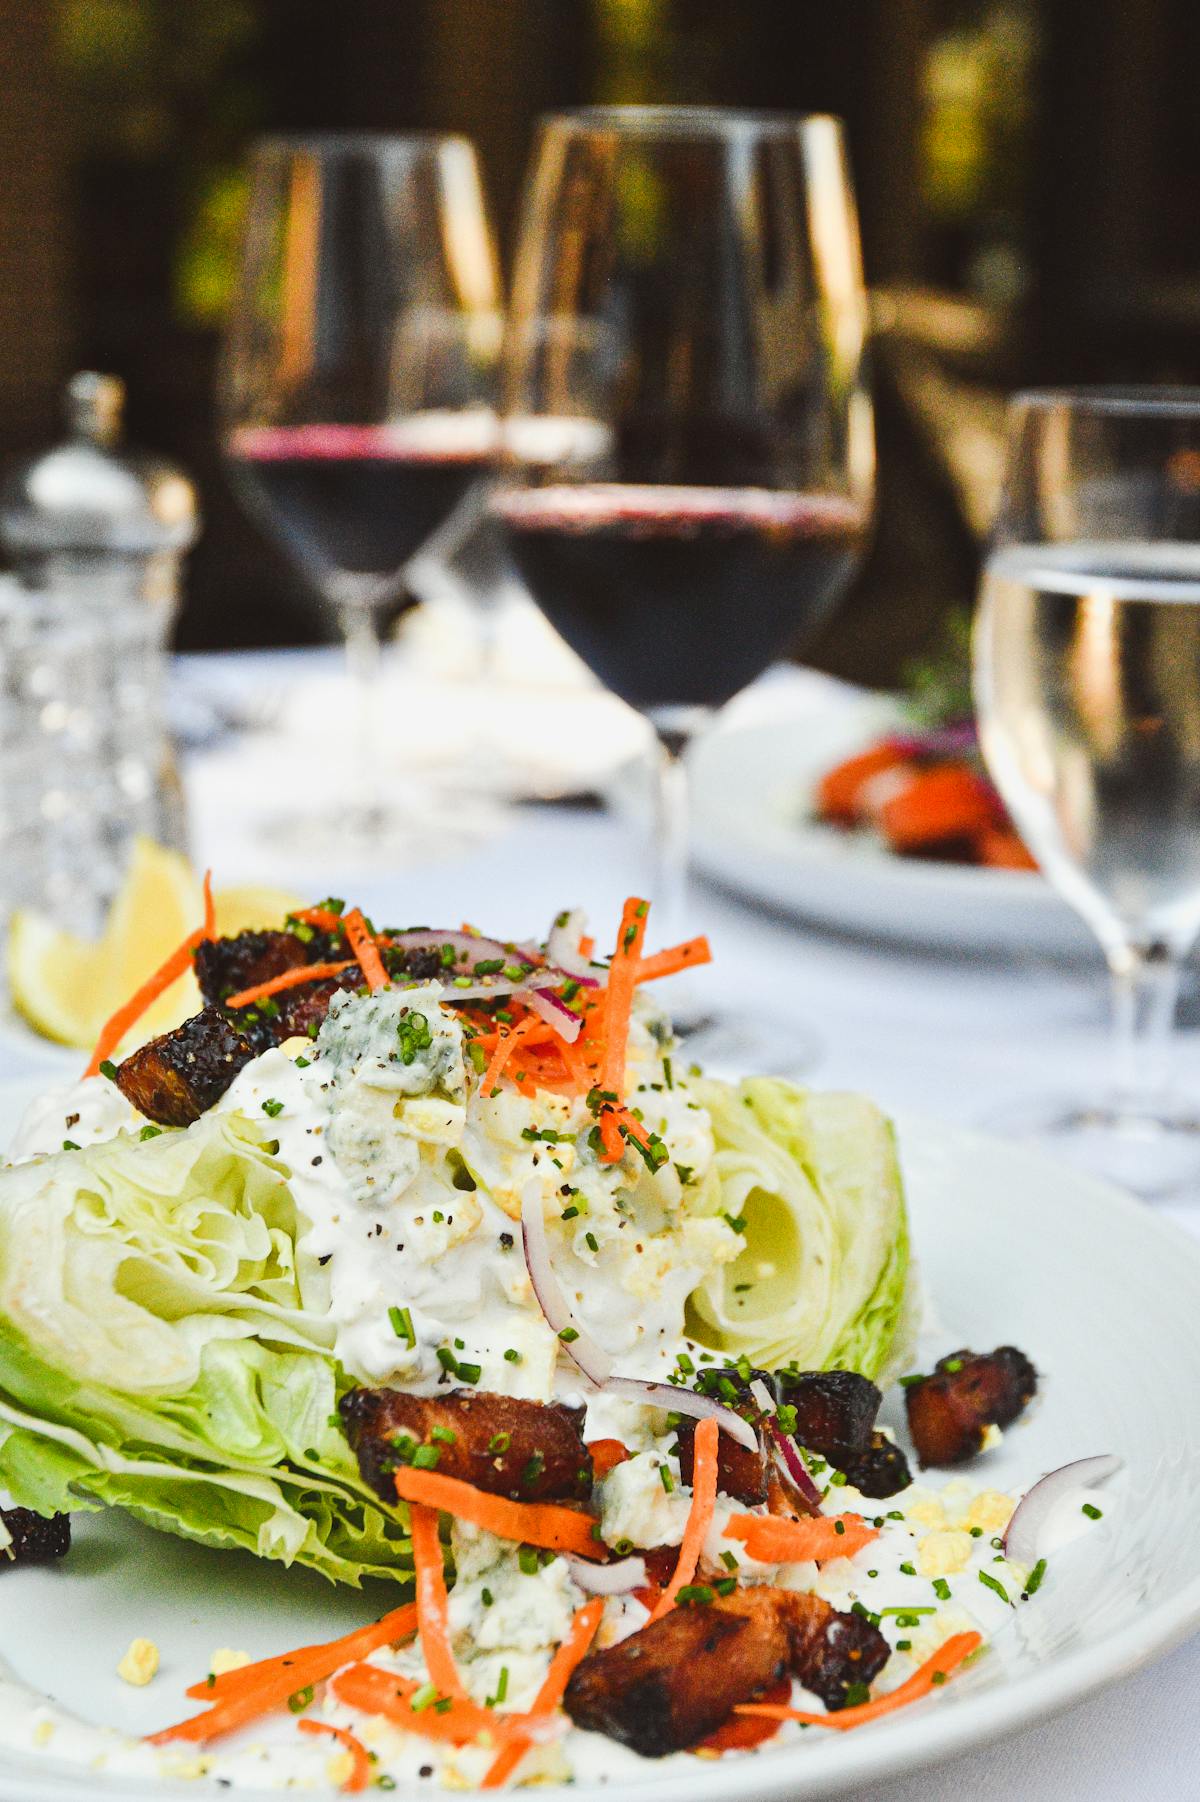 a close up of a plate of salad and a glass of wine